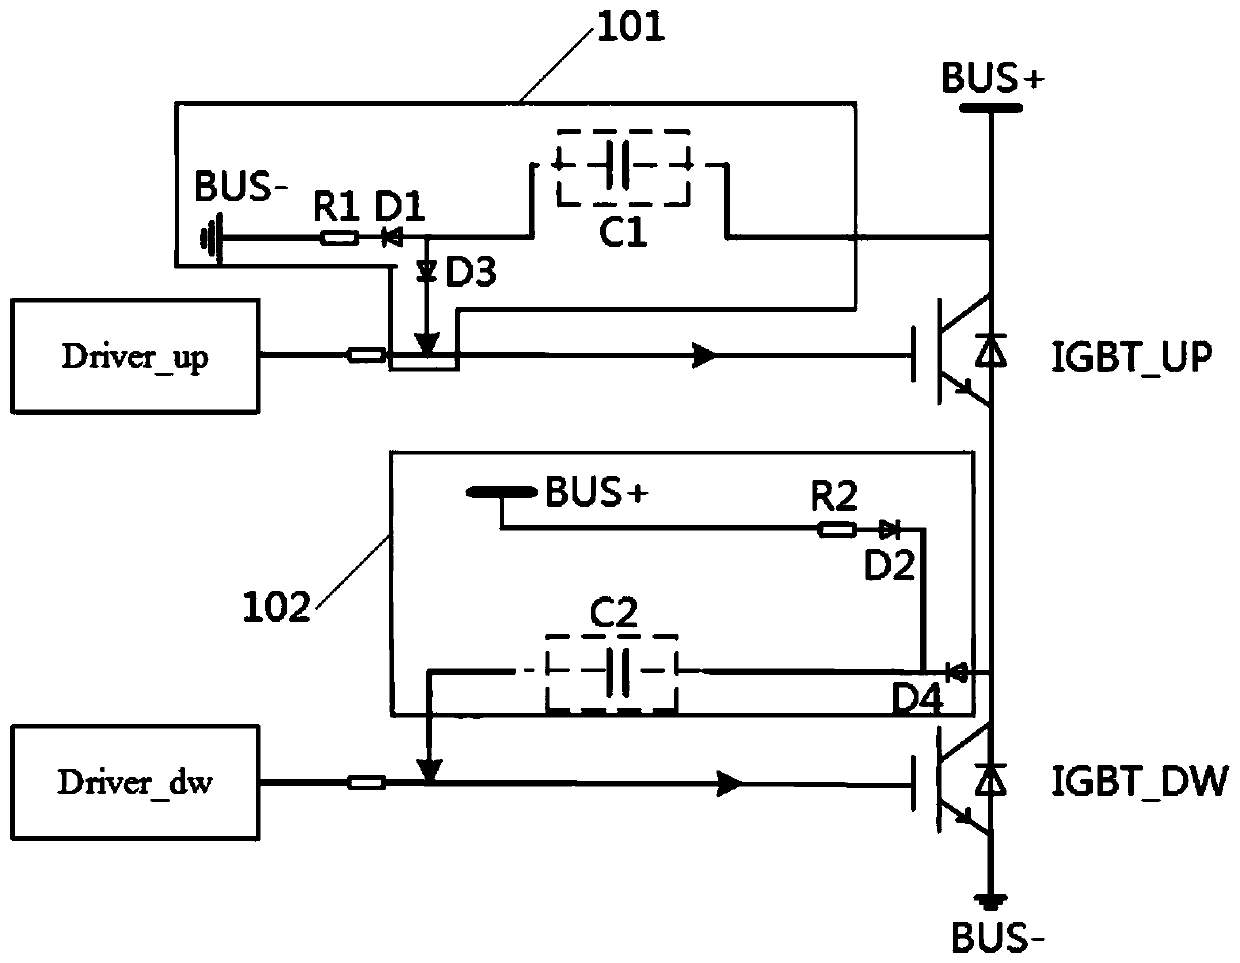 Absorption capacitor pre-charging circuit and peak voltage absorption circuit